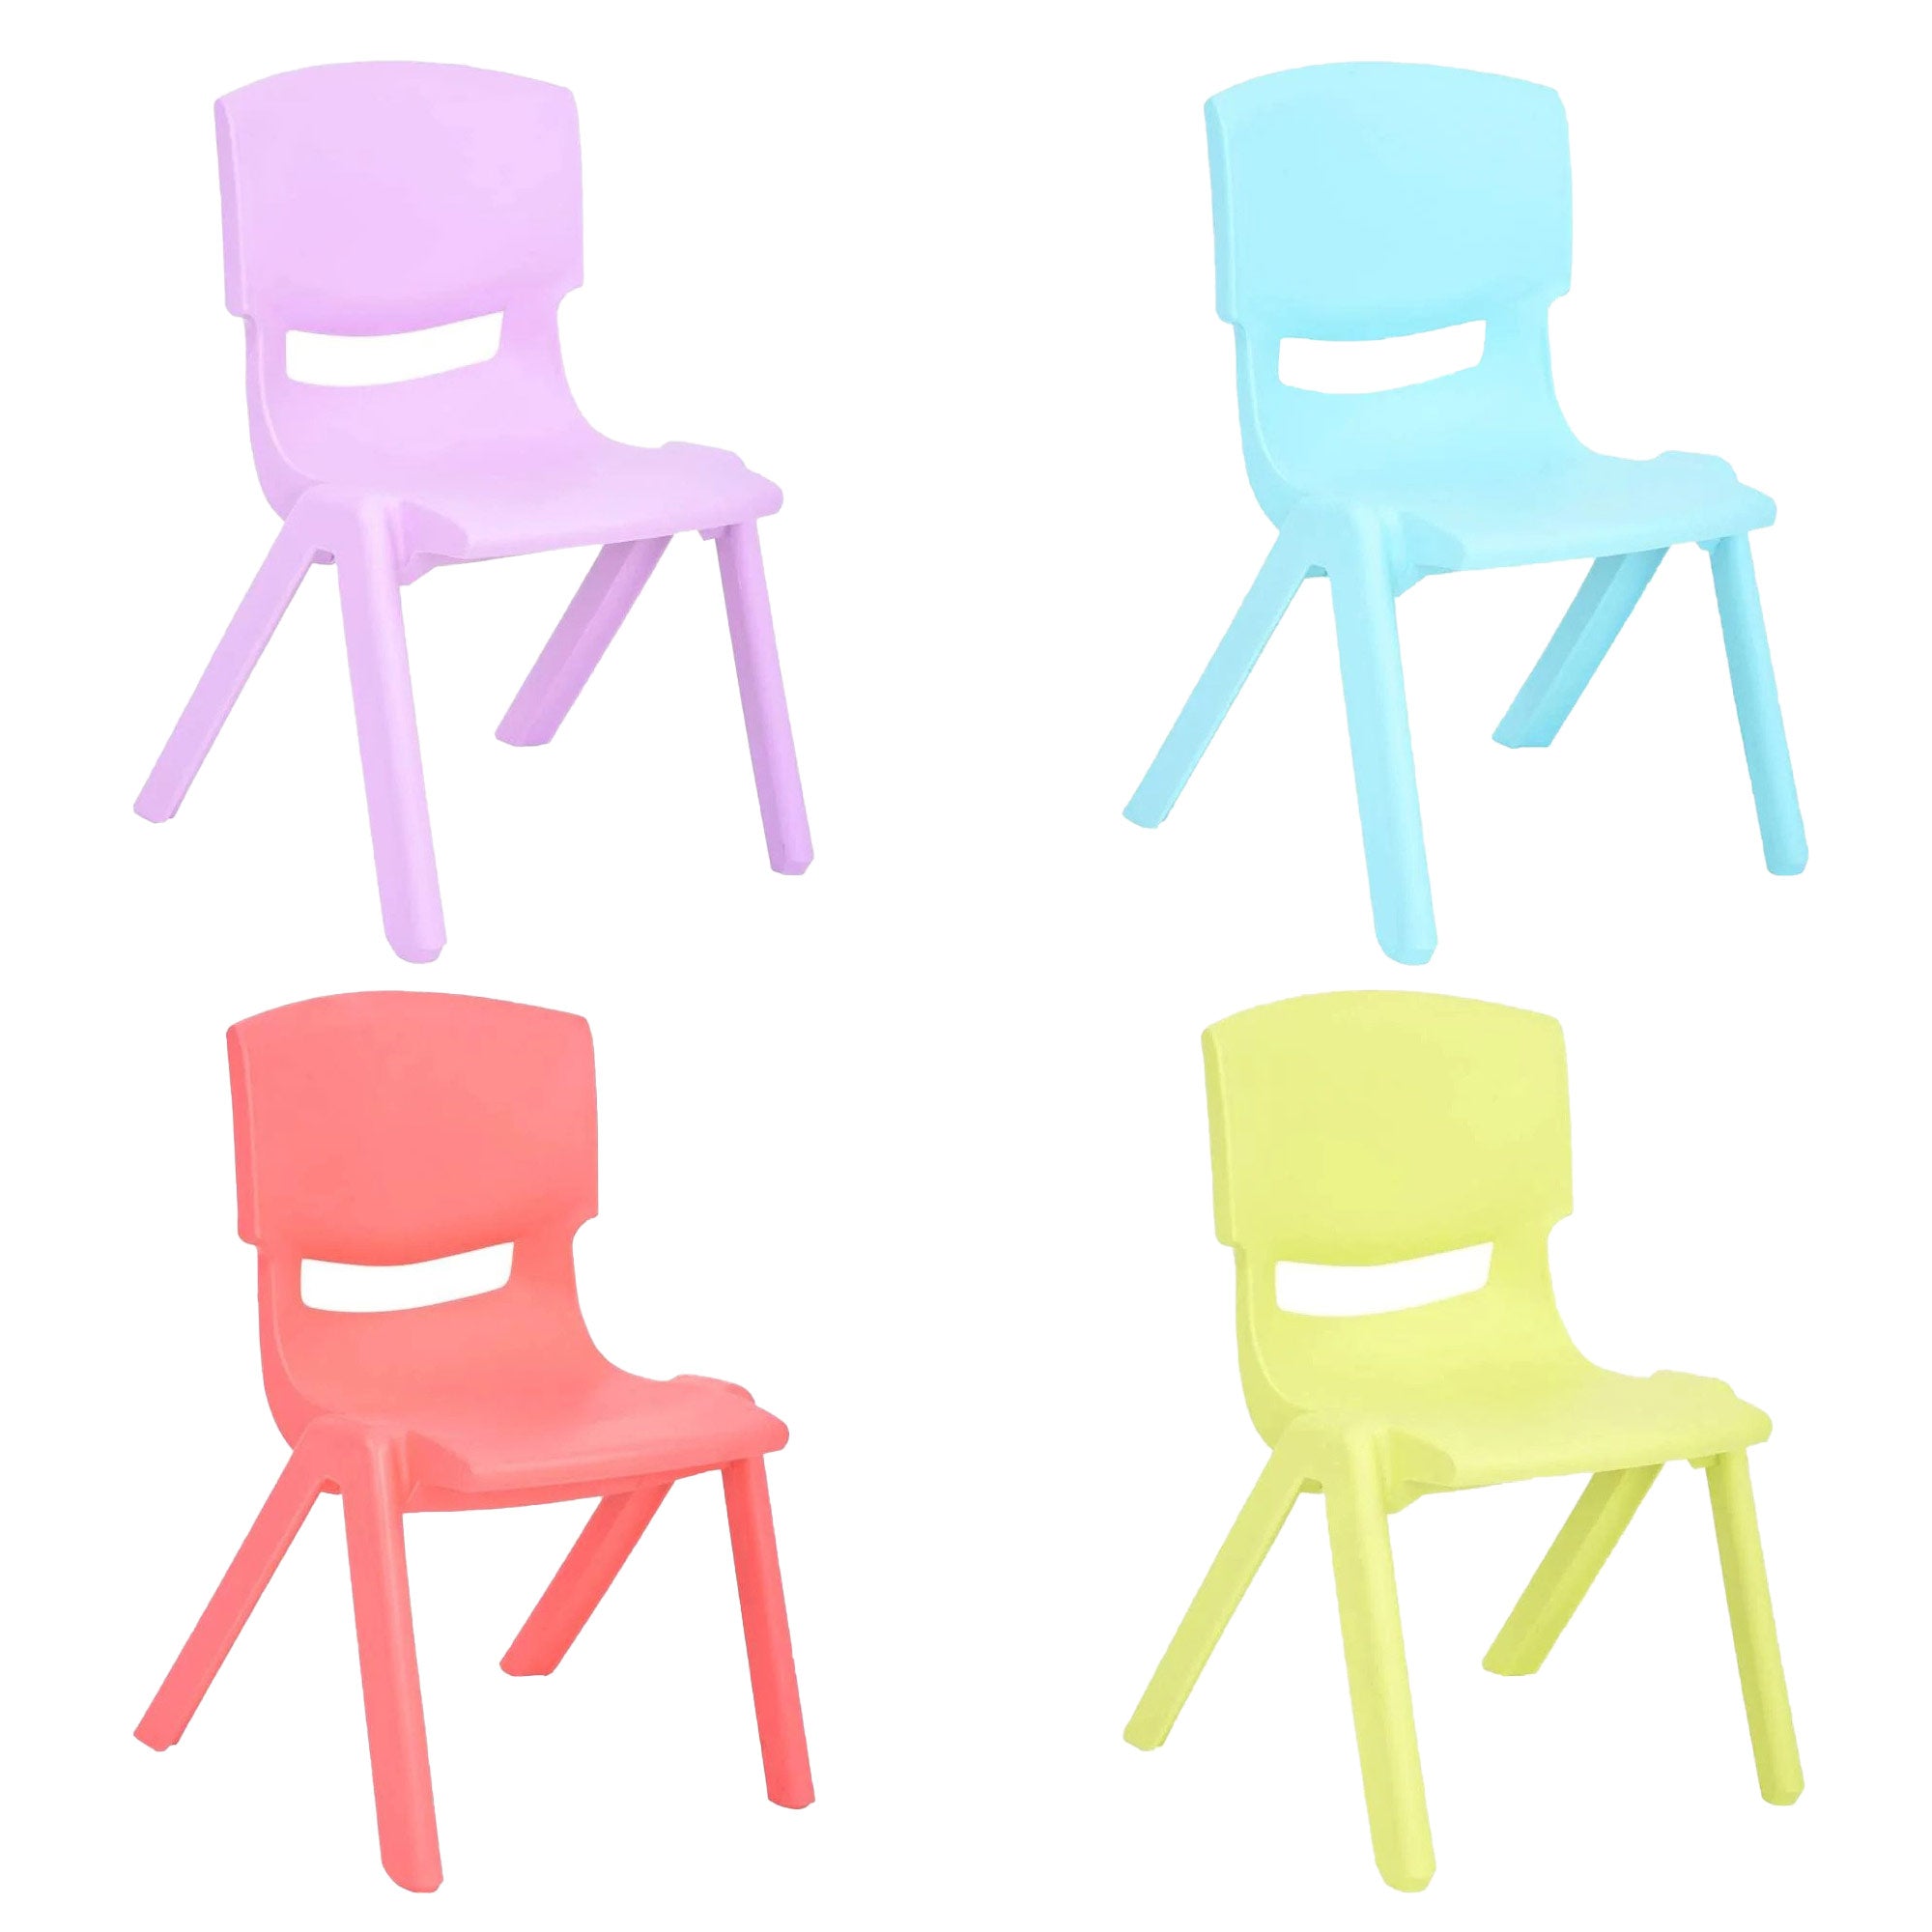 JOON Stackable Plastic Kids Learning Chairs Set, Lilac-Baby Blue-Coral-Lime